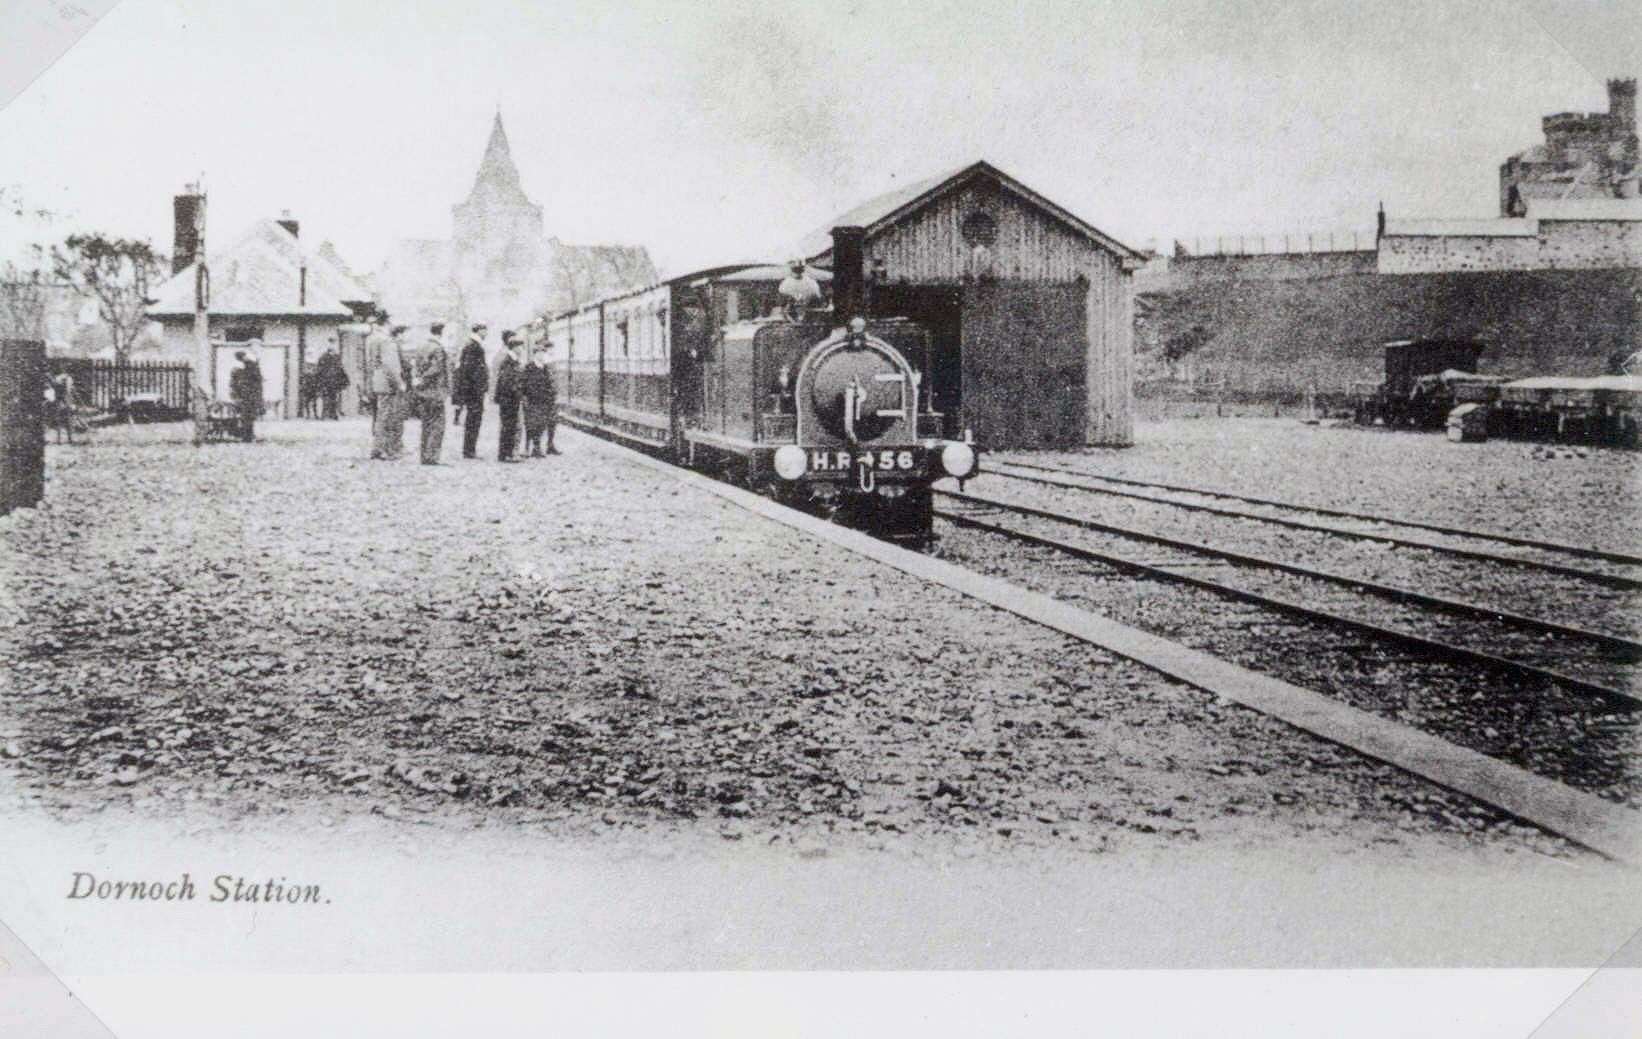 First passenger train leaving Dornoch, June 2, 1902, from the collections of Historylinks Museum, Dornoch.